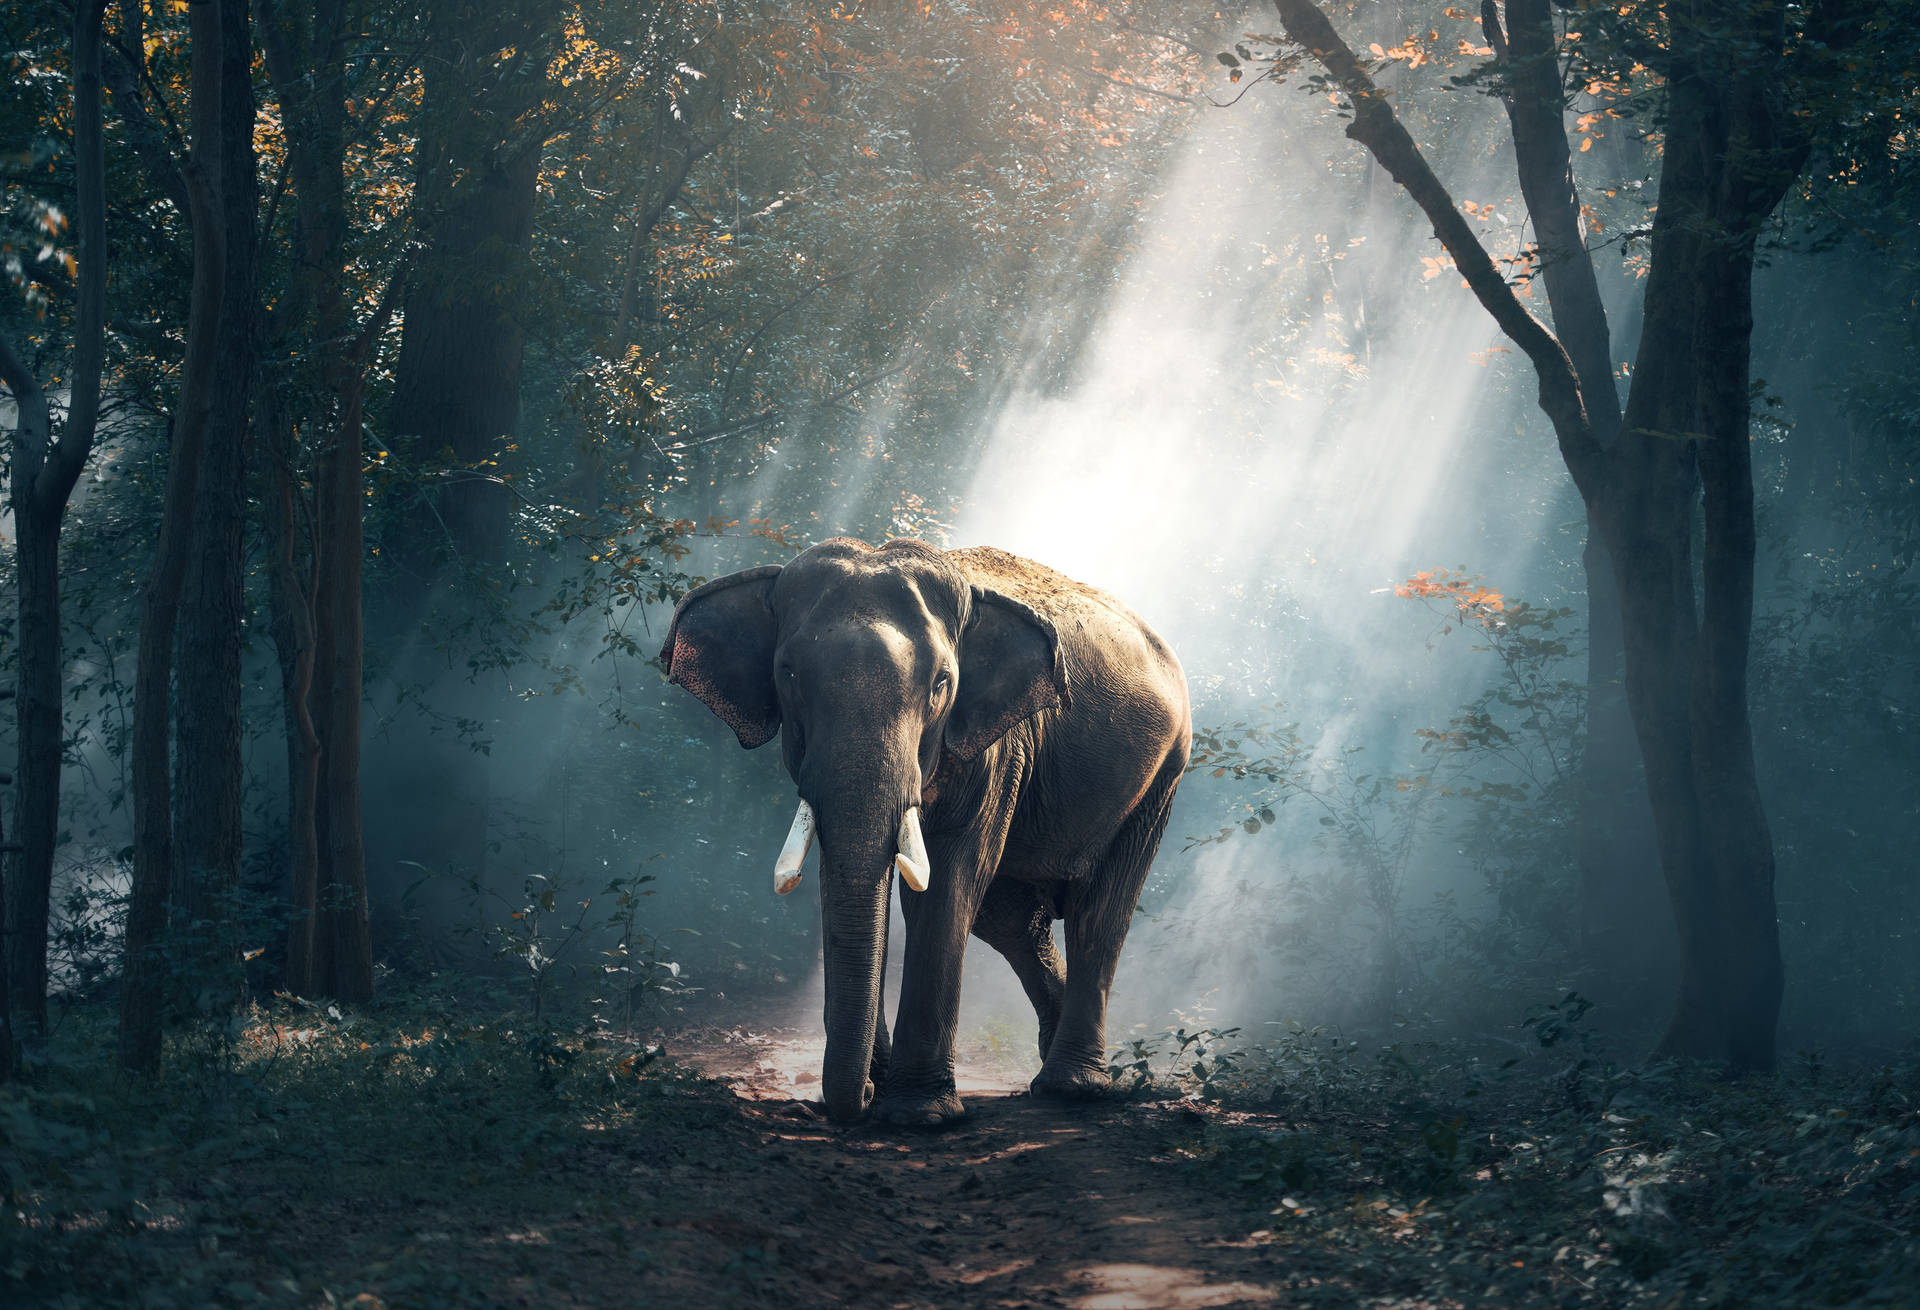 Majestic Elephant In The Woods Wild Animal Wallpaper